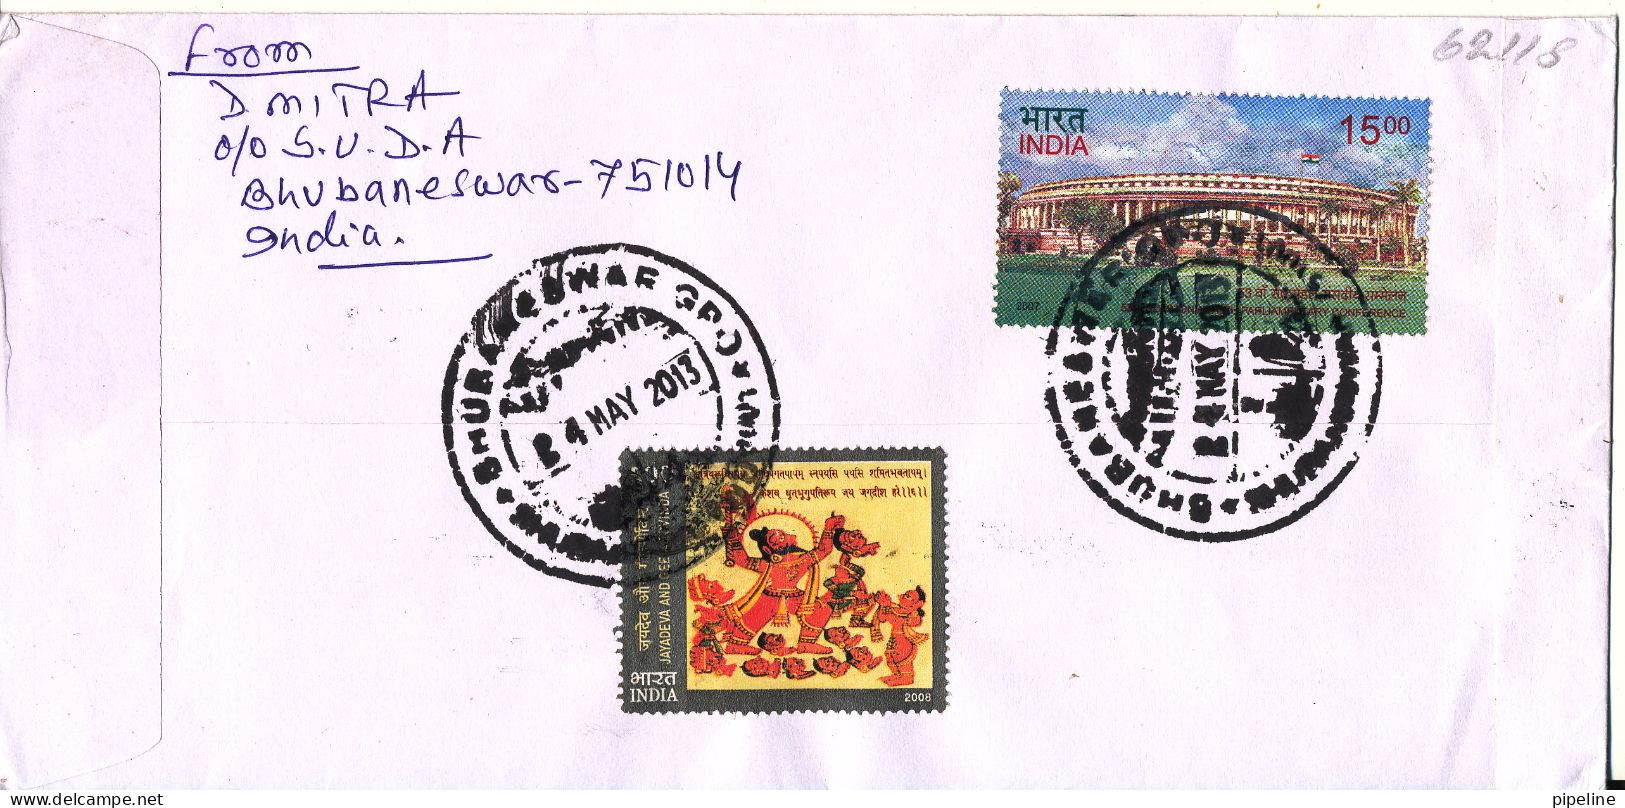 India FDC 24-5-2013 Uprated On The Backside Of The Cover Sent Air Mail To Denmark 24-5-2013 - FDC